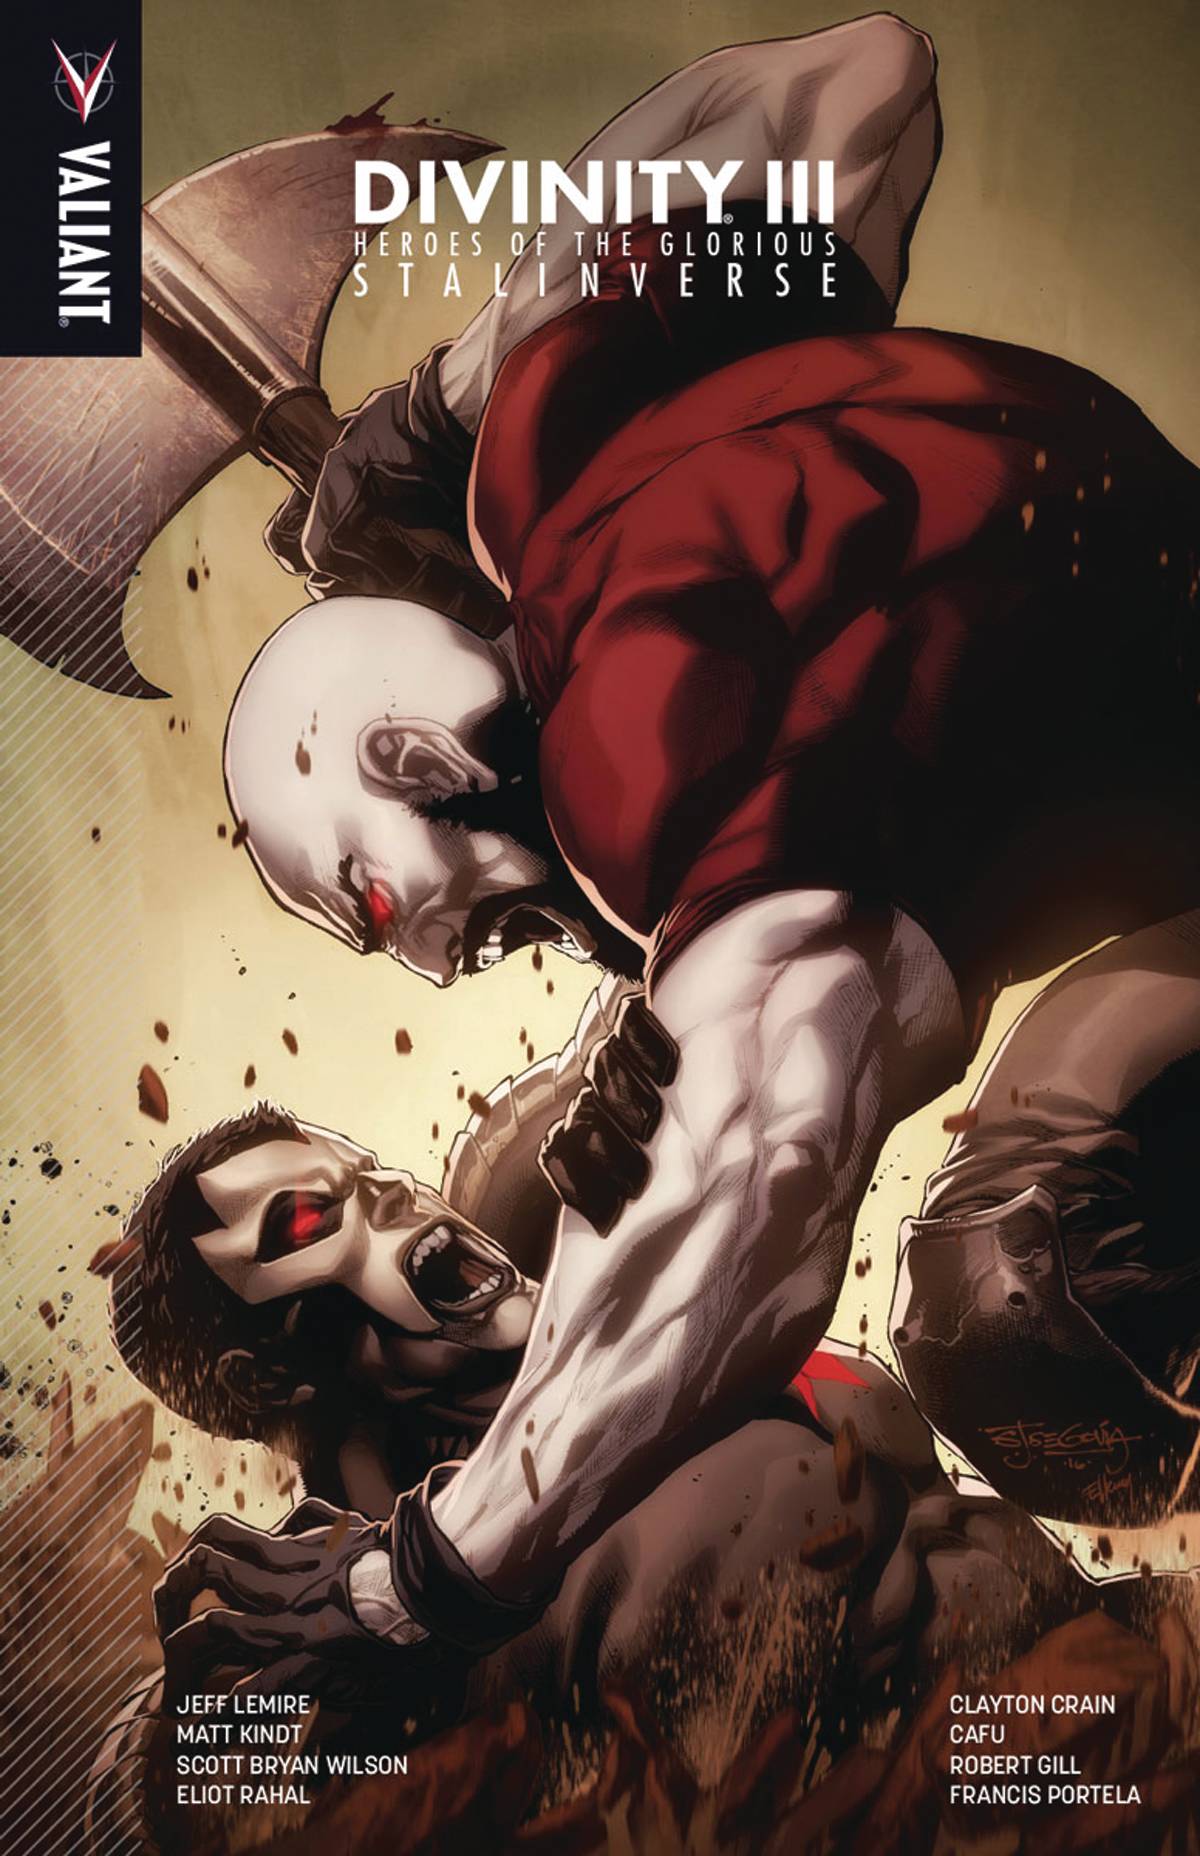 Divinity III Heroes of the Glorious Stalinverse Graphic Novel